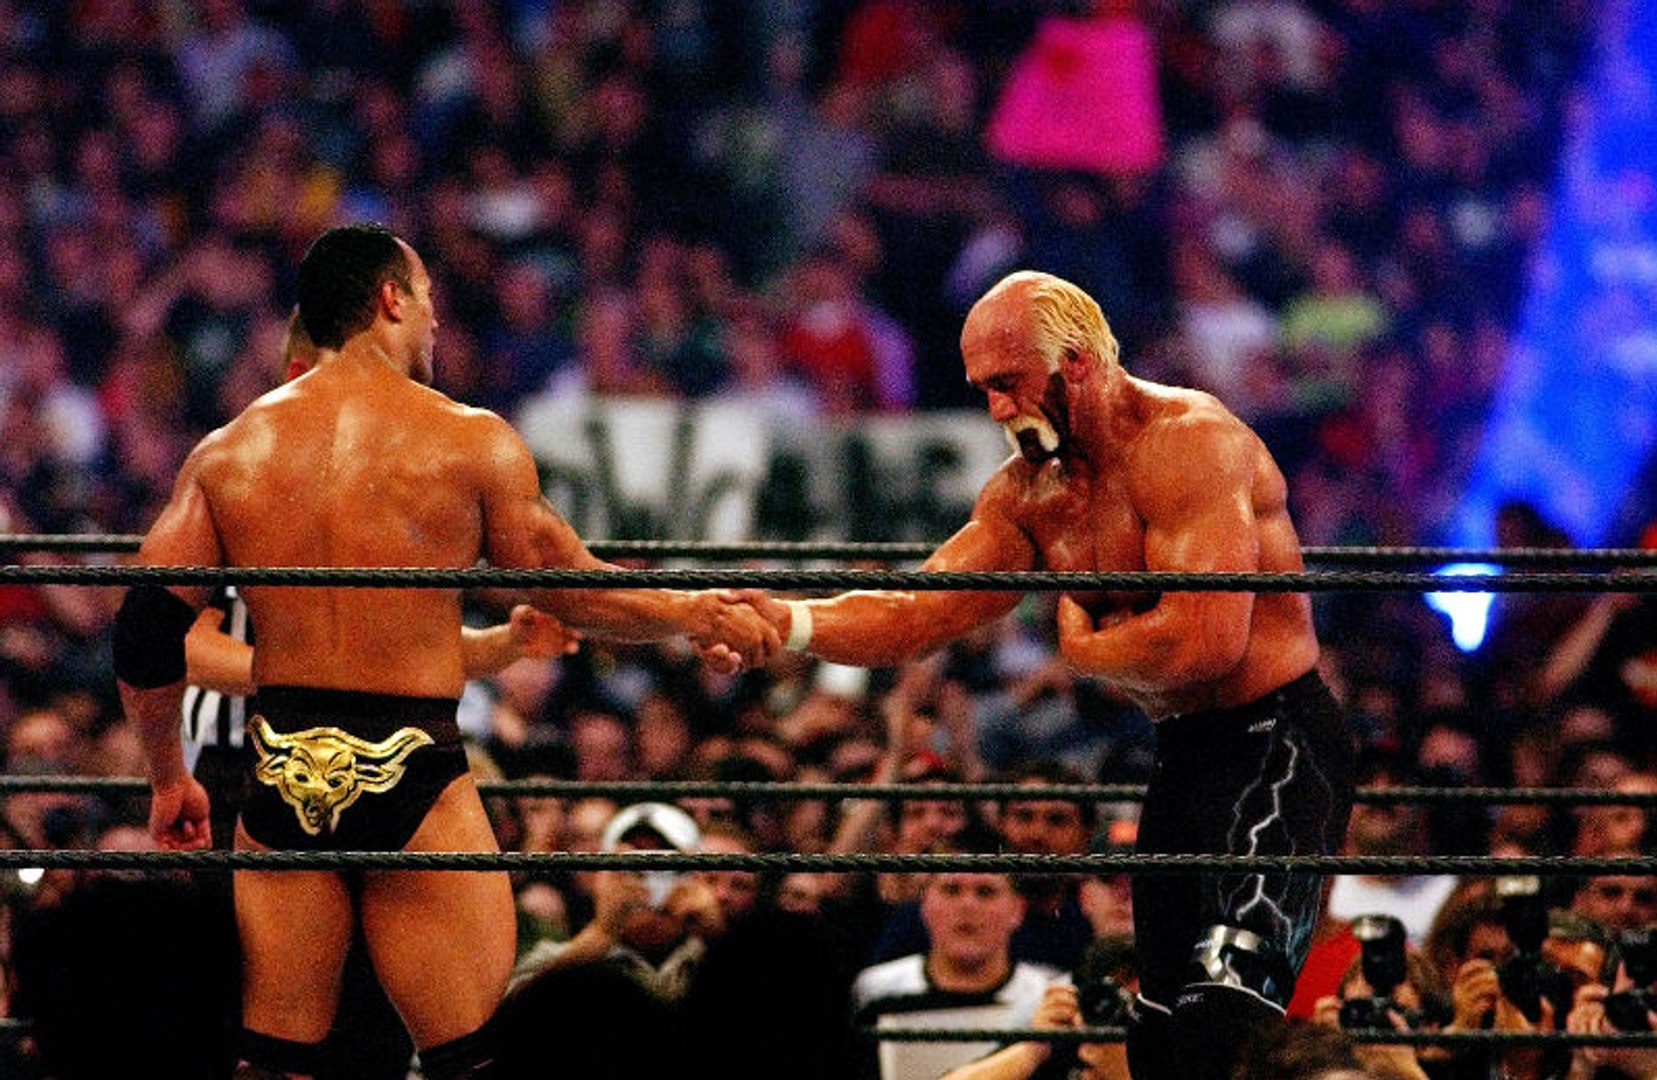 Hogan Calls Match Against The "One Of The Greatest WrestleMania Matches All Time"